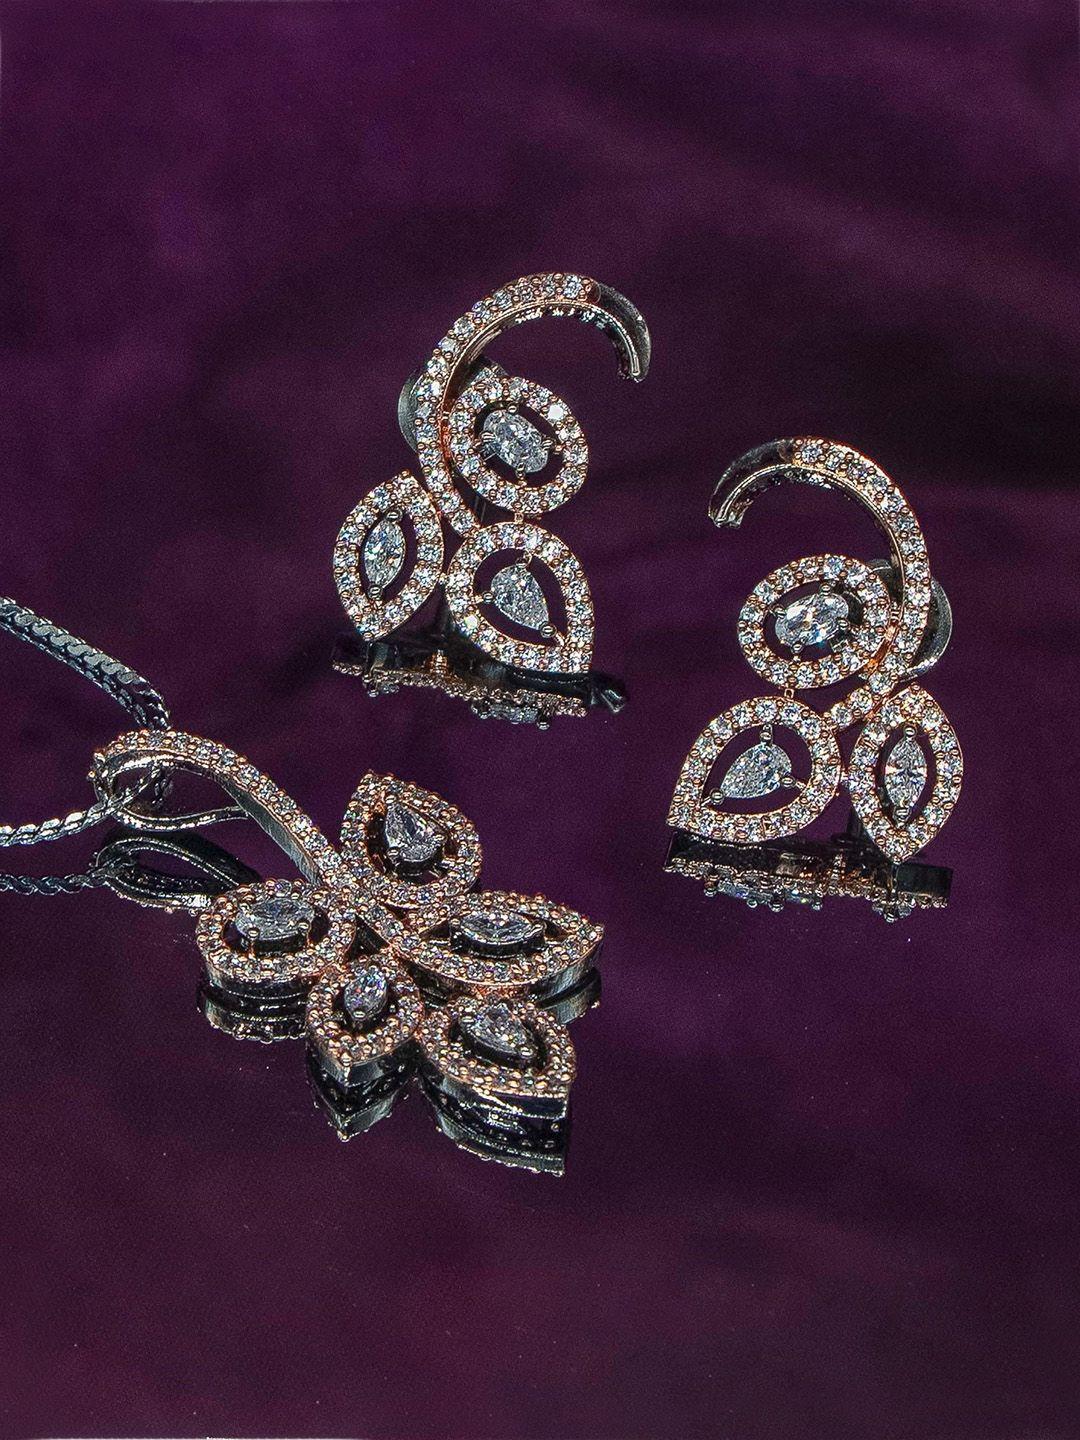 manikya rose gold-plated american diamond-studded flower shaped pendant and earrings